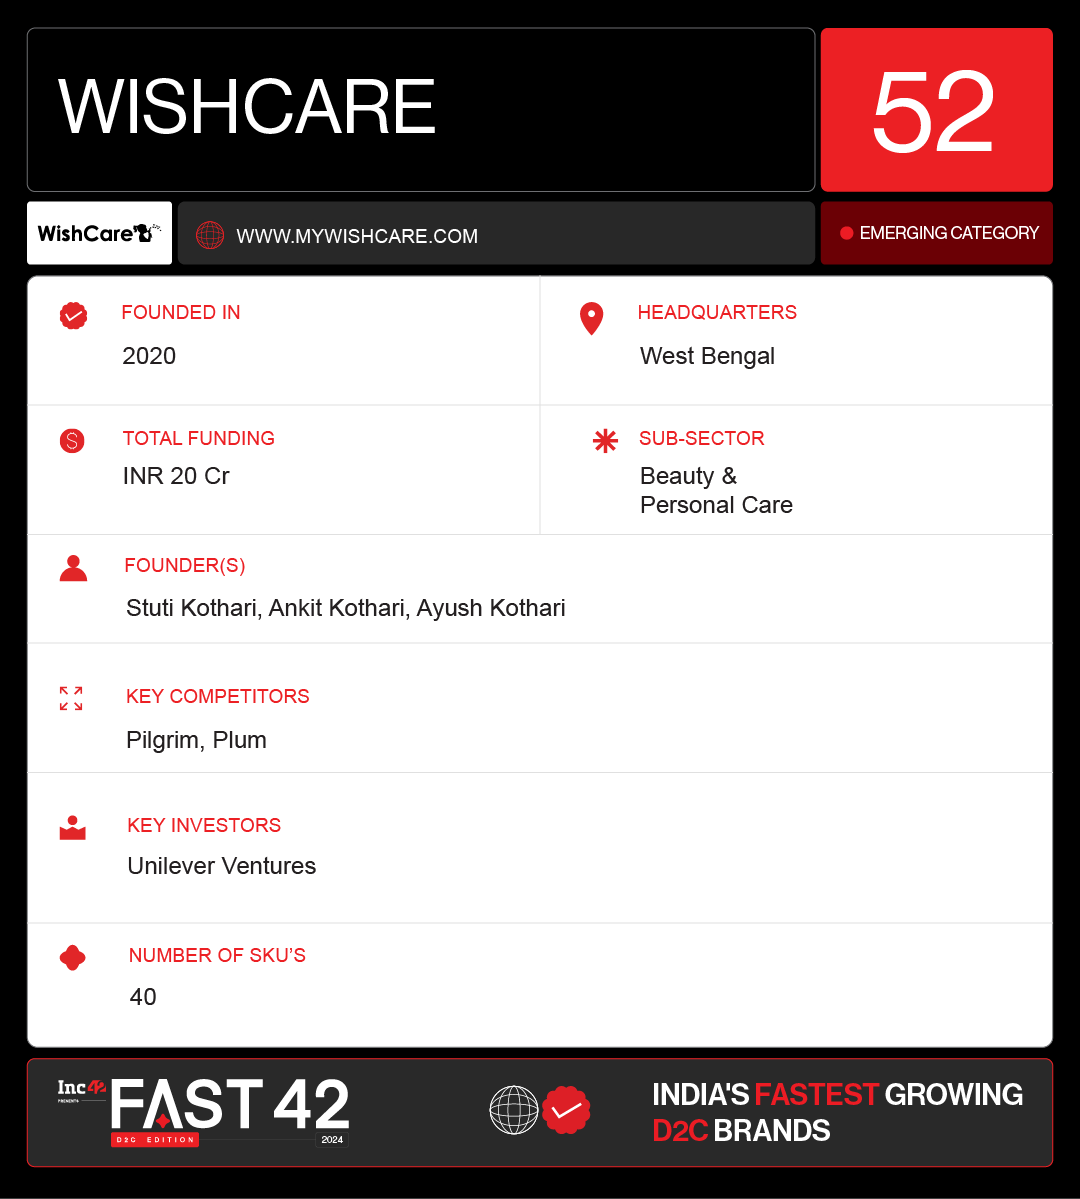 Hassle-Free Self-Care Gets A Boost With WishCare’s Safe And Potent Personal Care Range